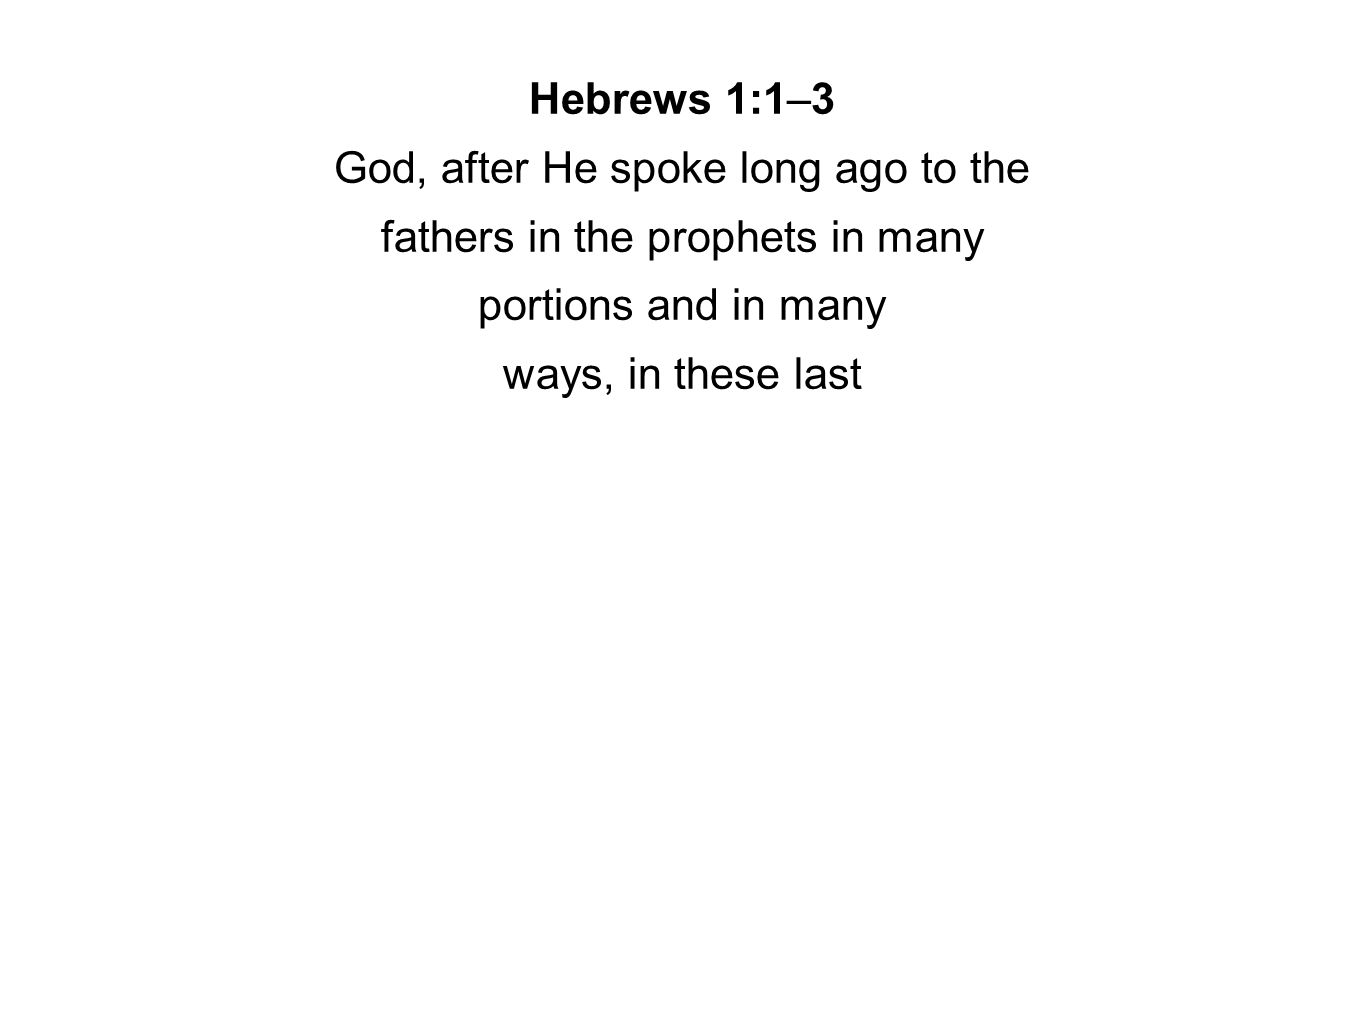 Hebrews 1:1–3 God, after He spoke long ago to the fathers in the prophets in many portions and in many ways, in these last